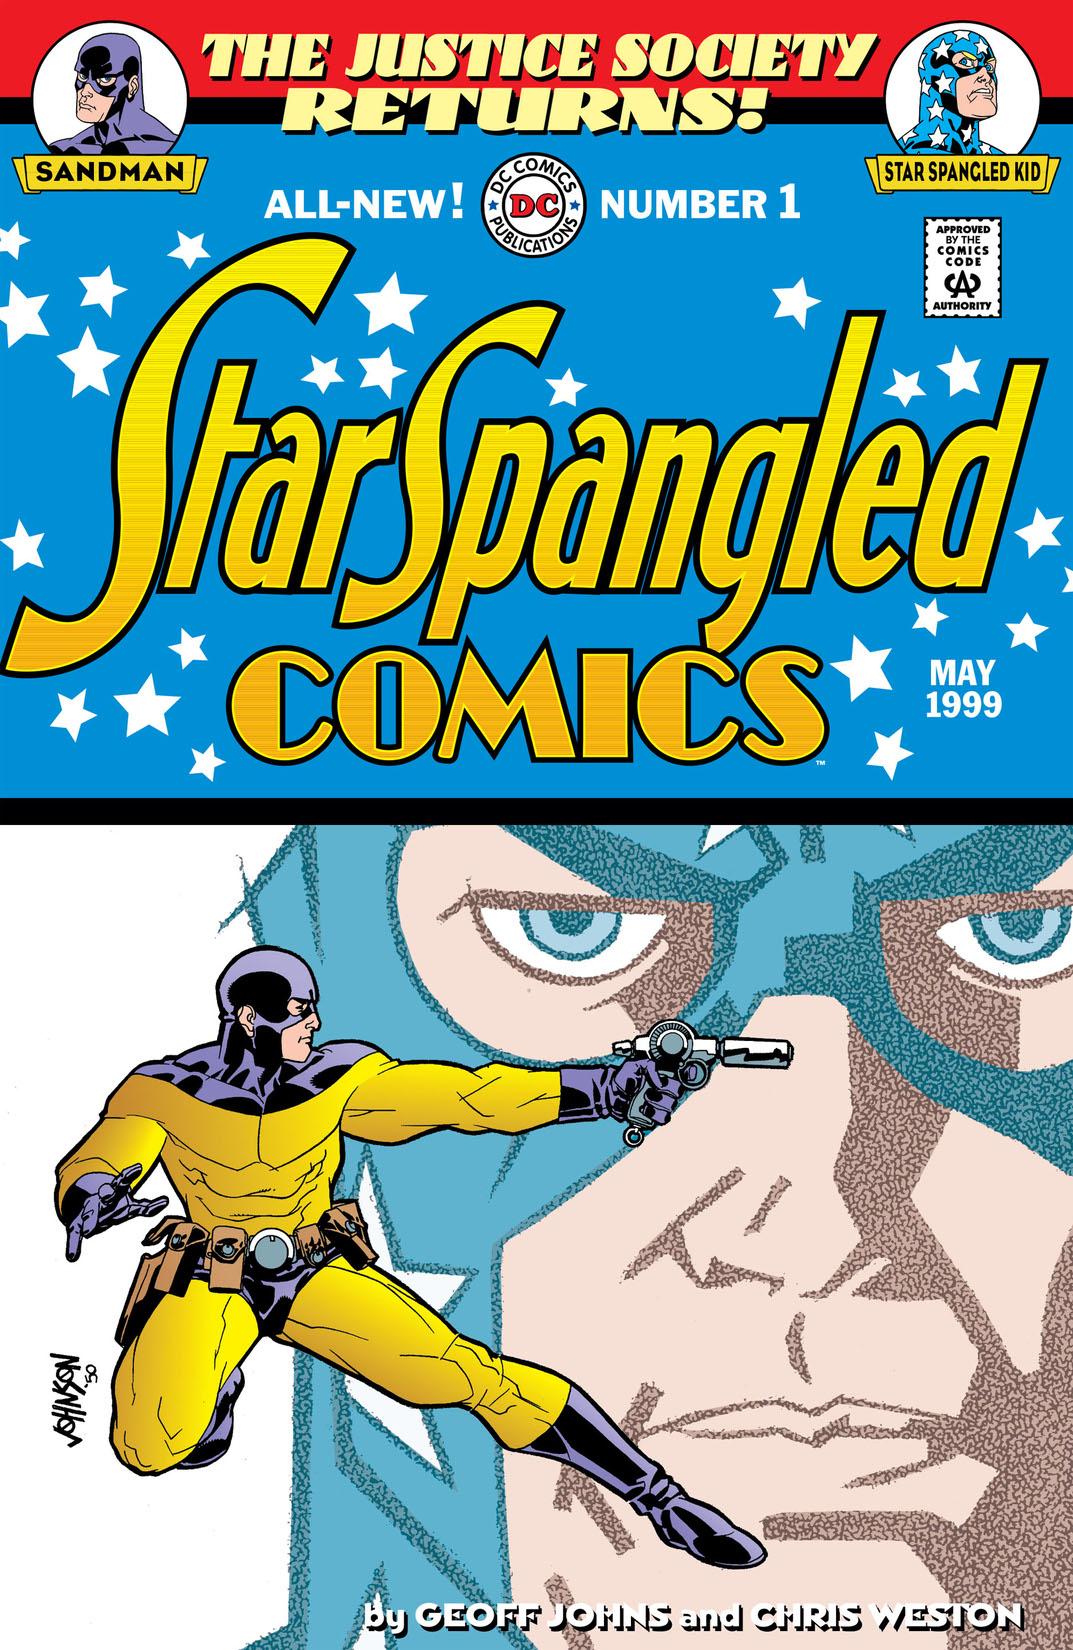 Star Spangled Comics #1 preview images